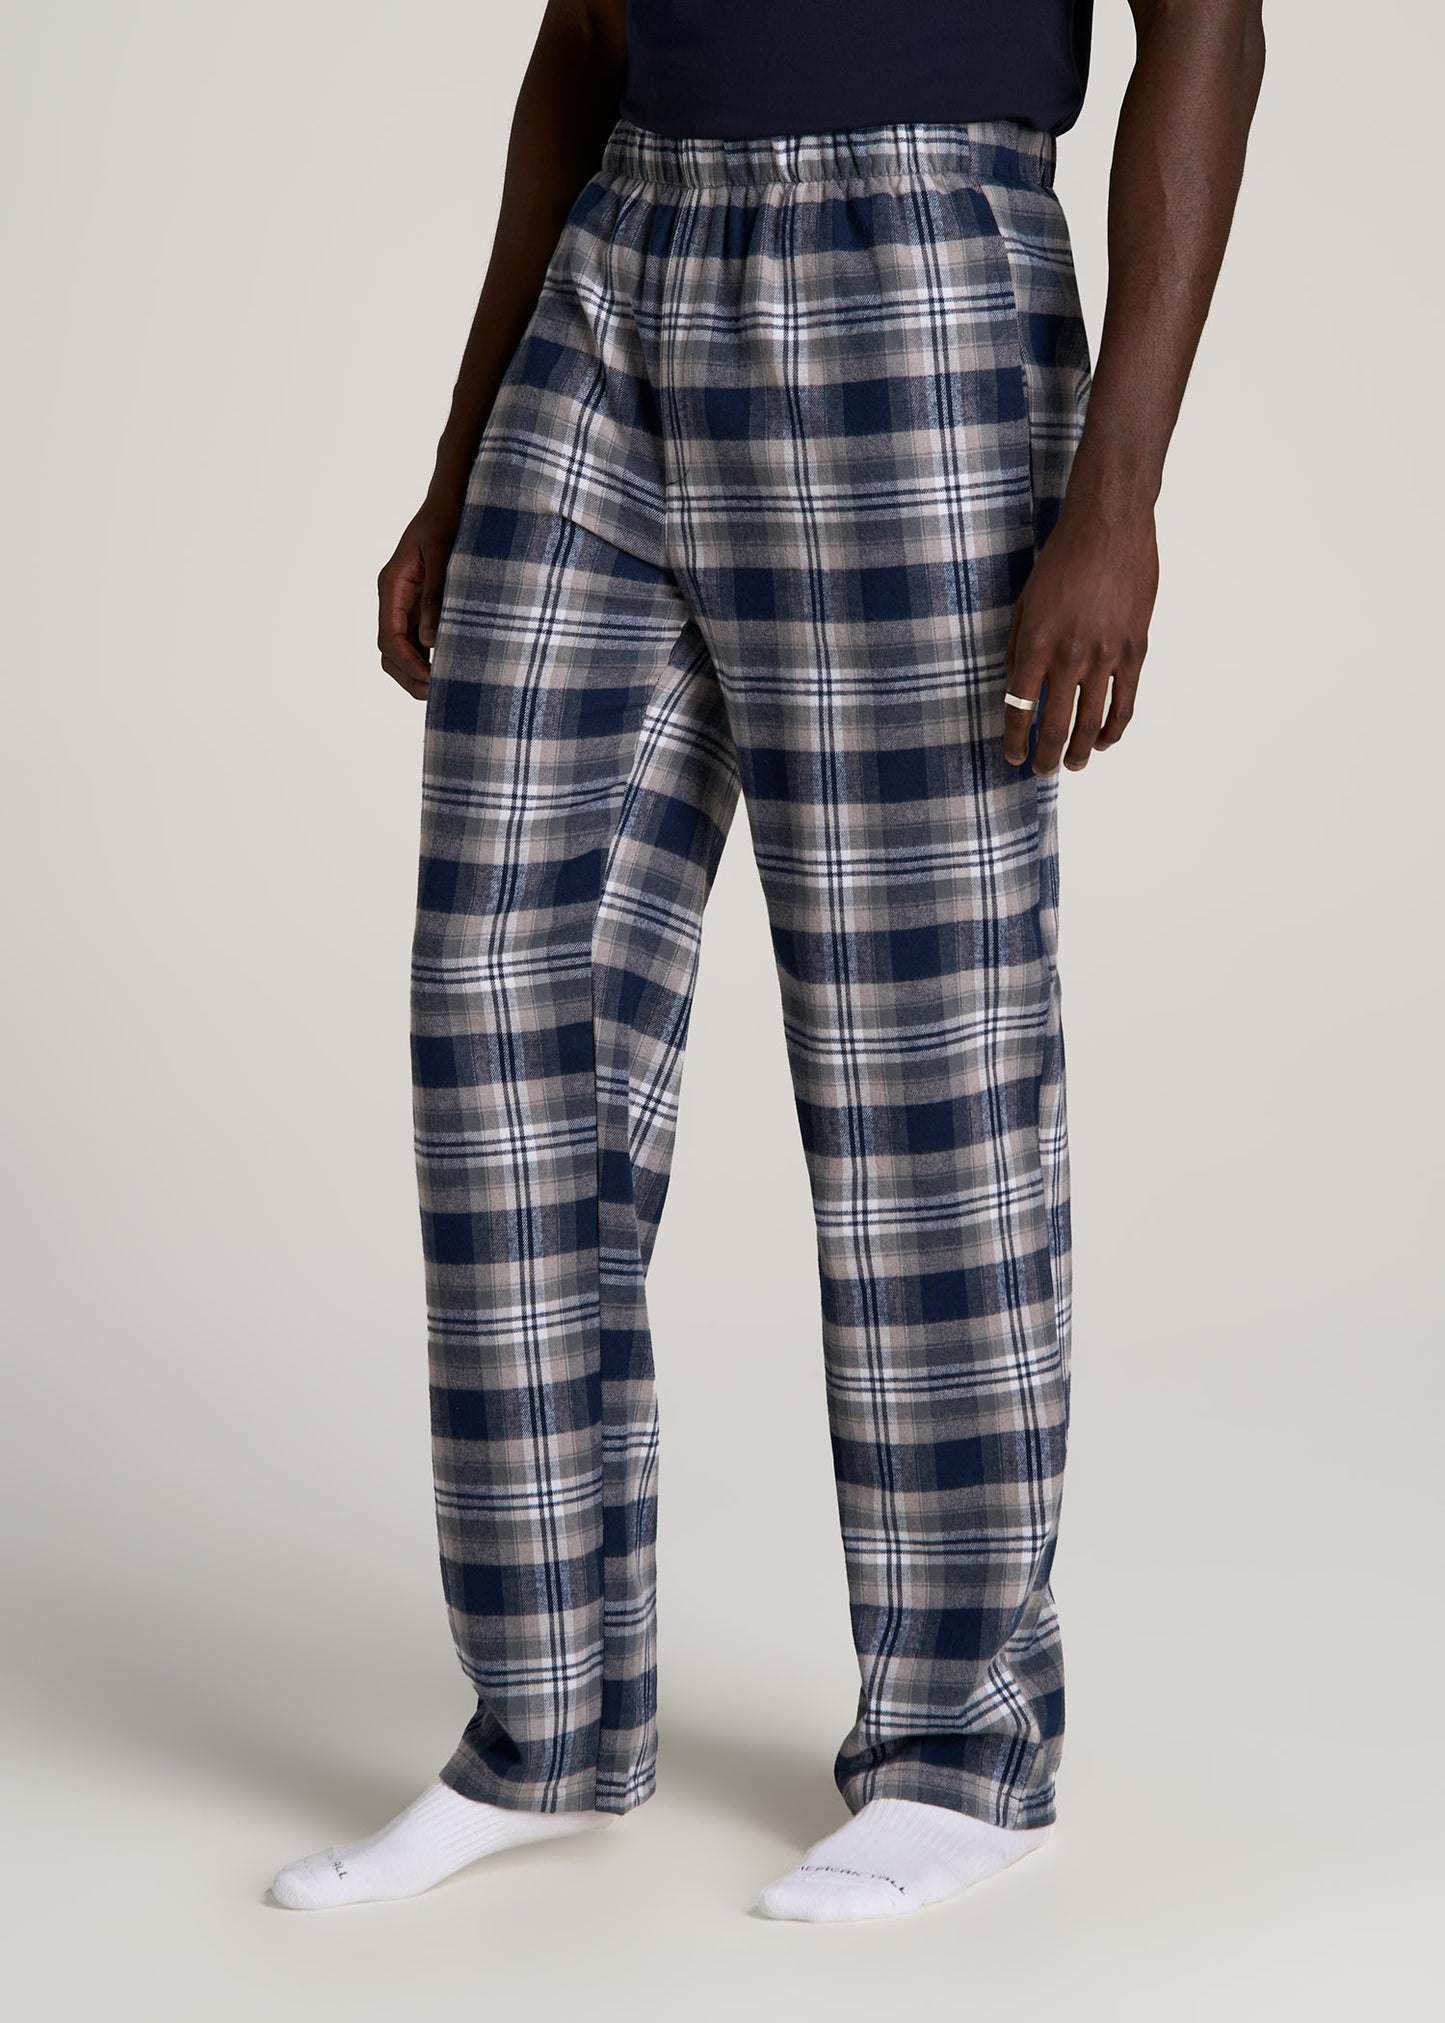 Navy Pleated wool-blend flannel trousers | YMC | MATCHES UK